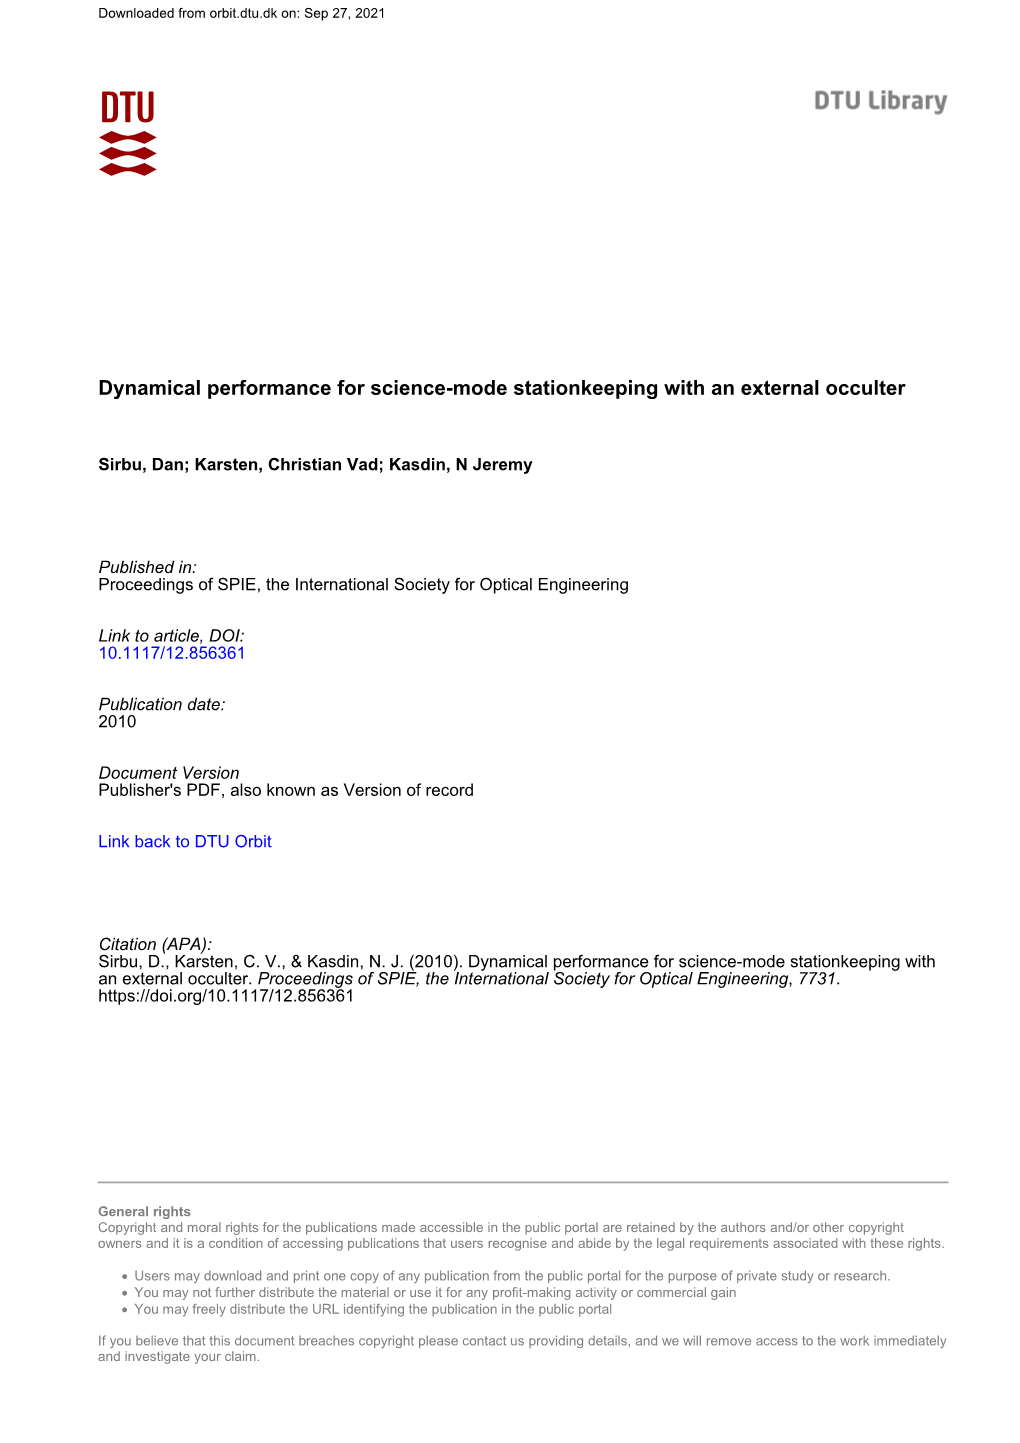 Dynamical Performance for Science-Mode Stationkeeping with an External Occulter